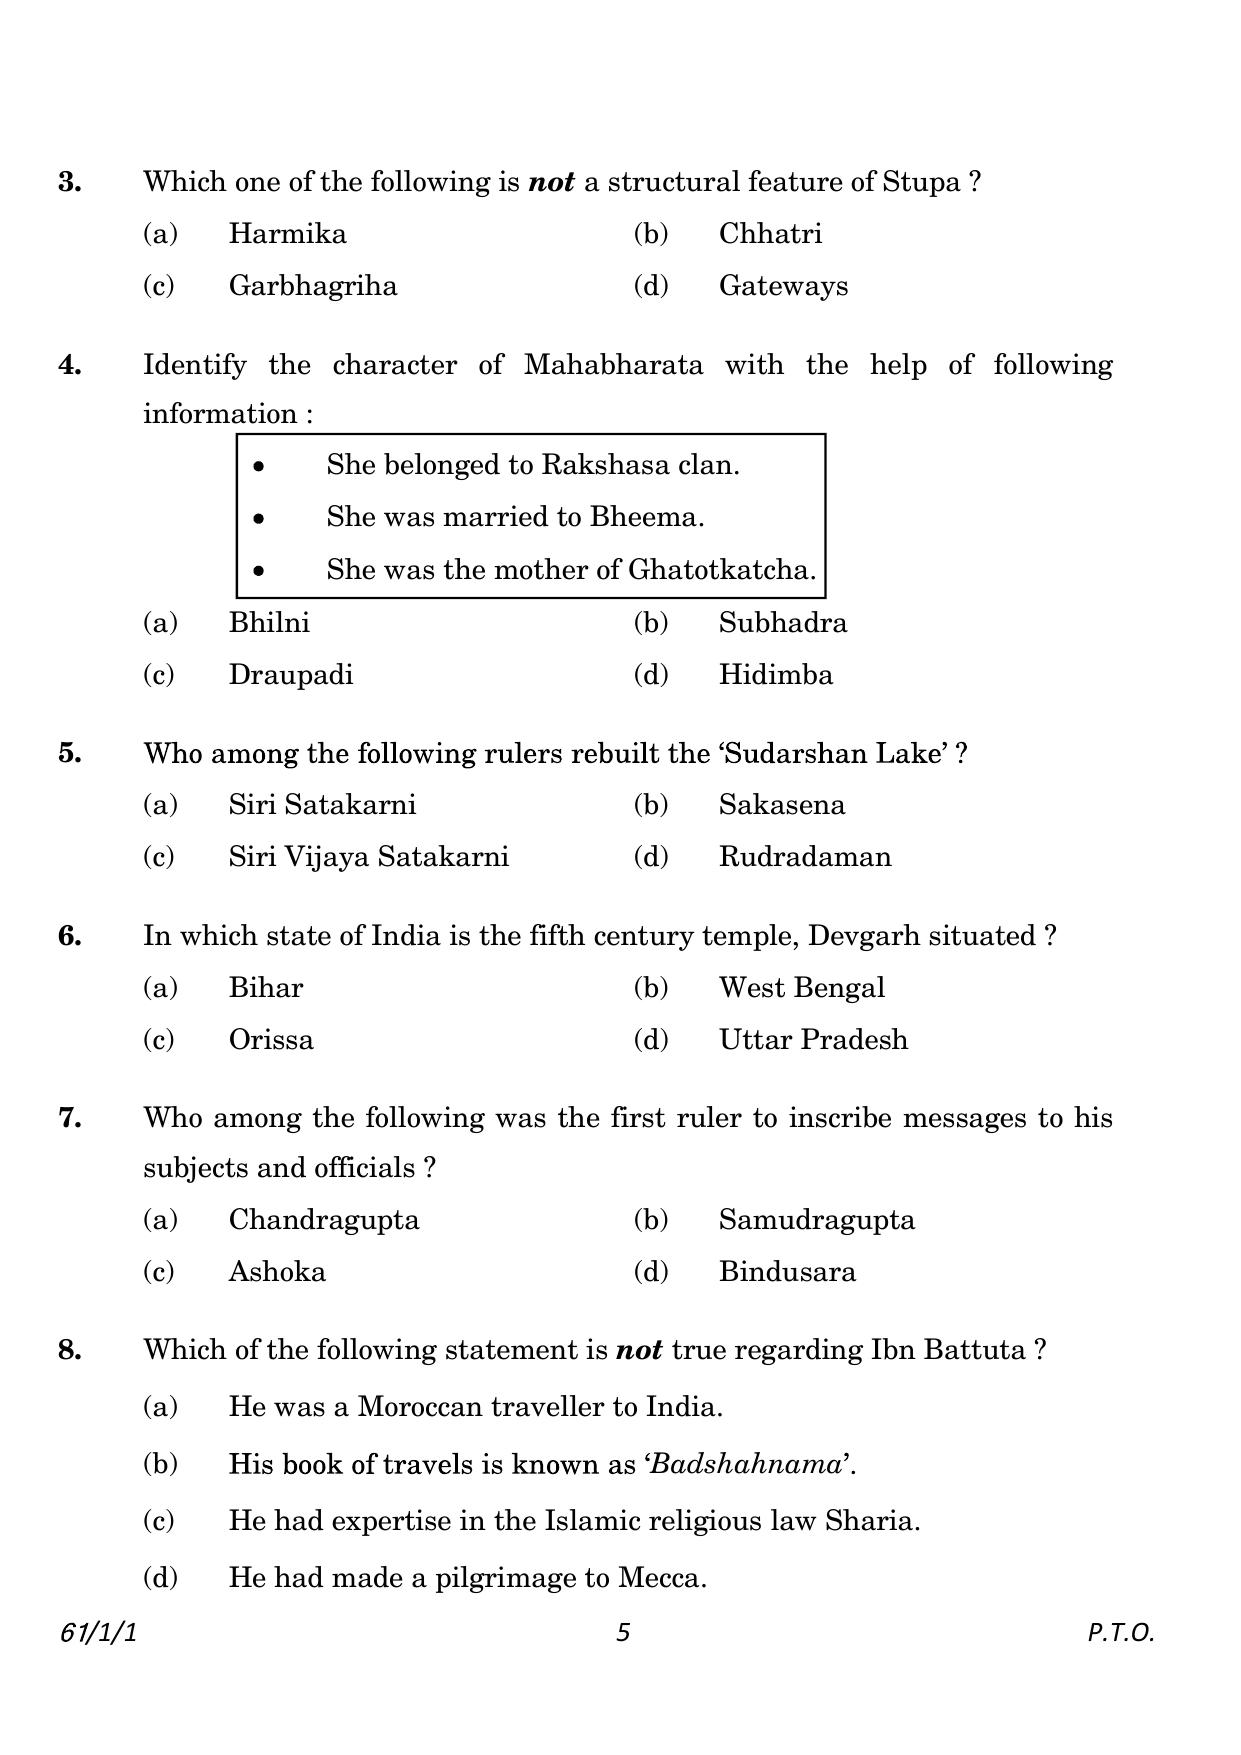 CBSE Class 12 61-1-1 History 2023 Question Paper - Page 5